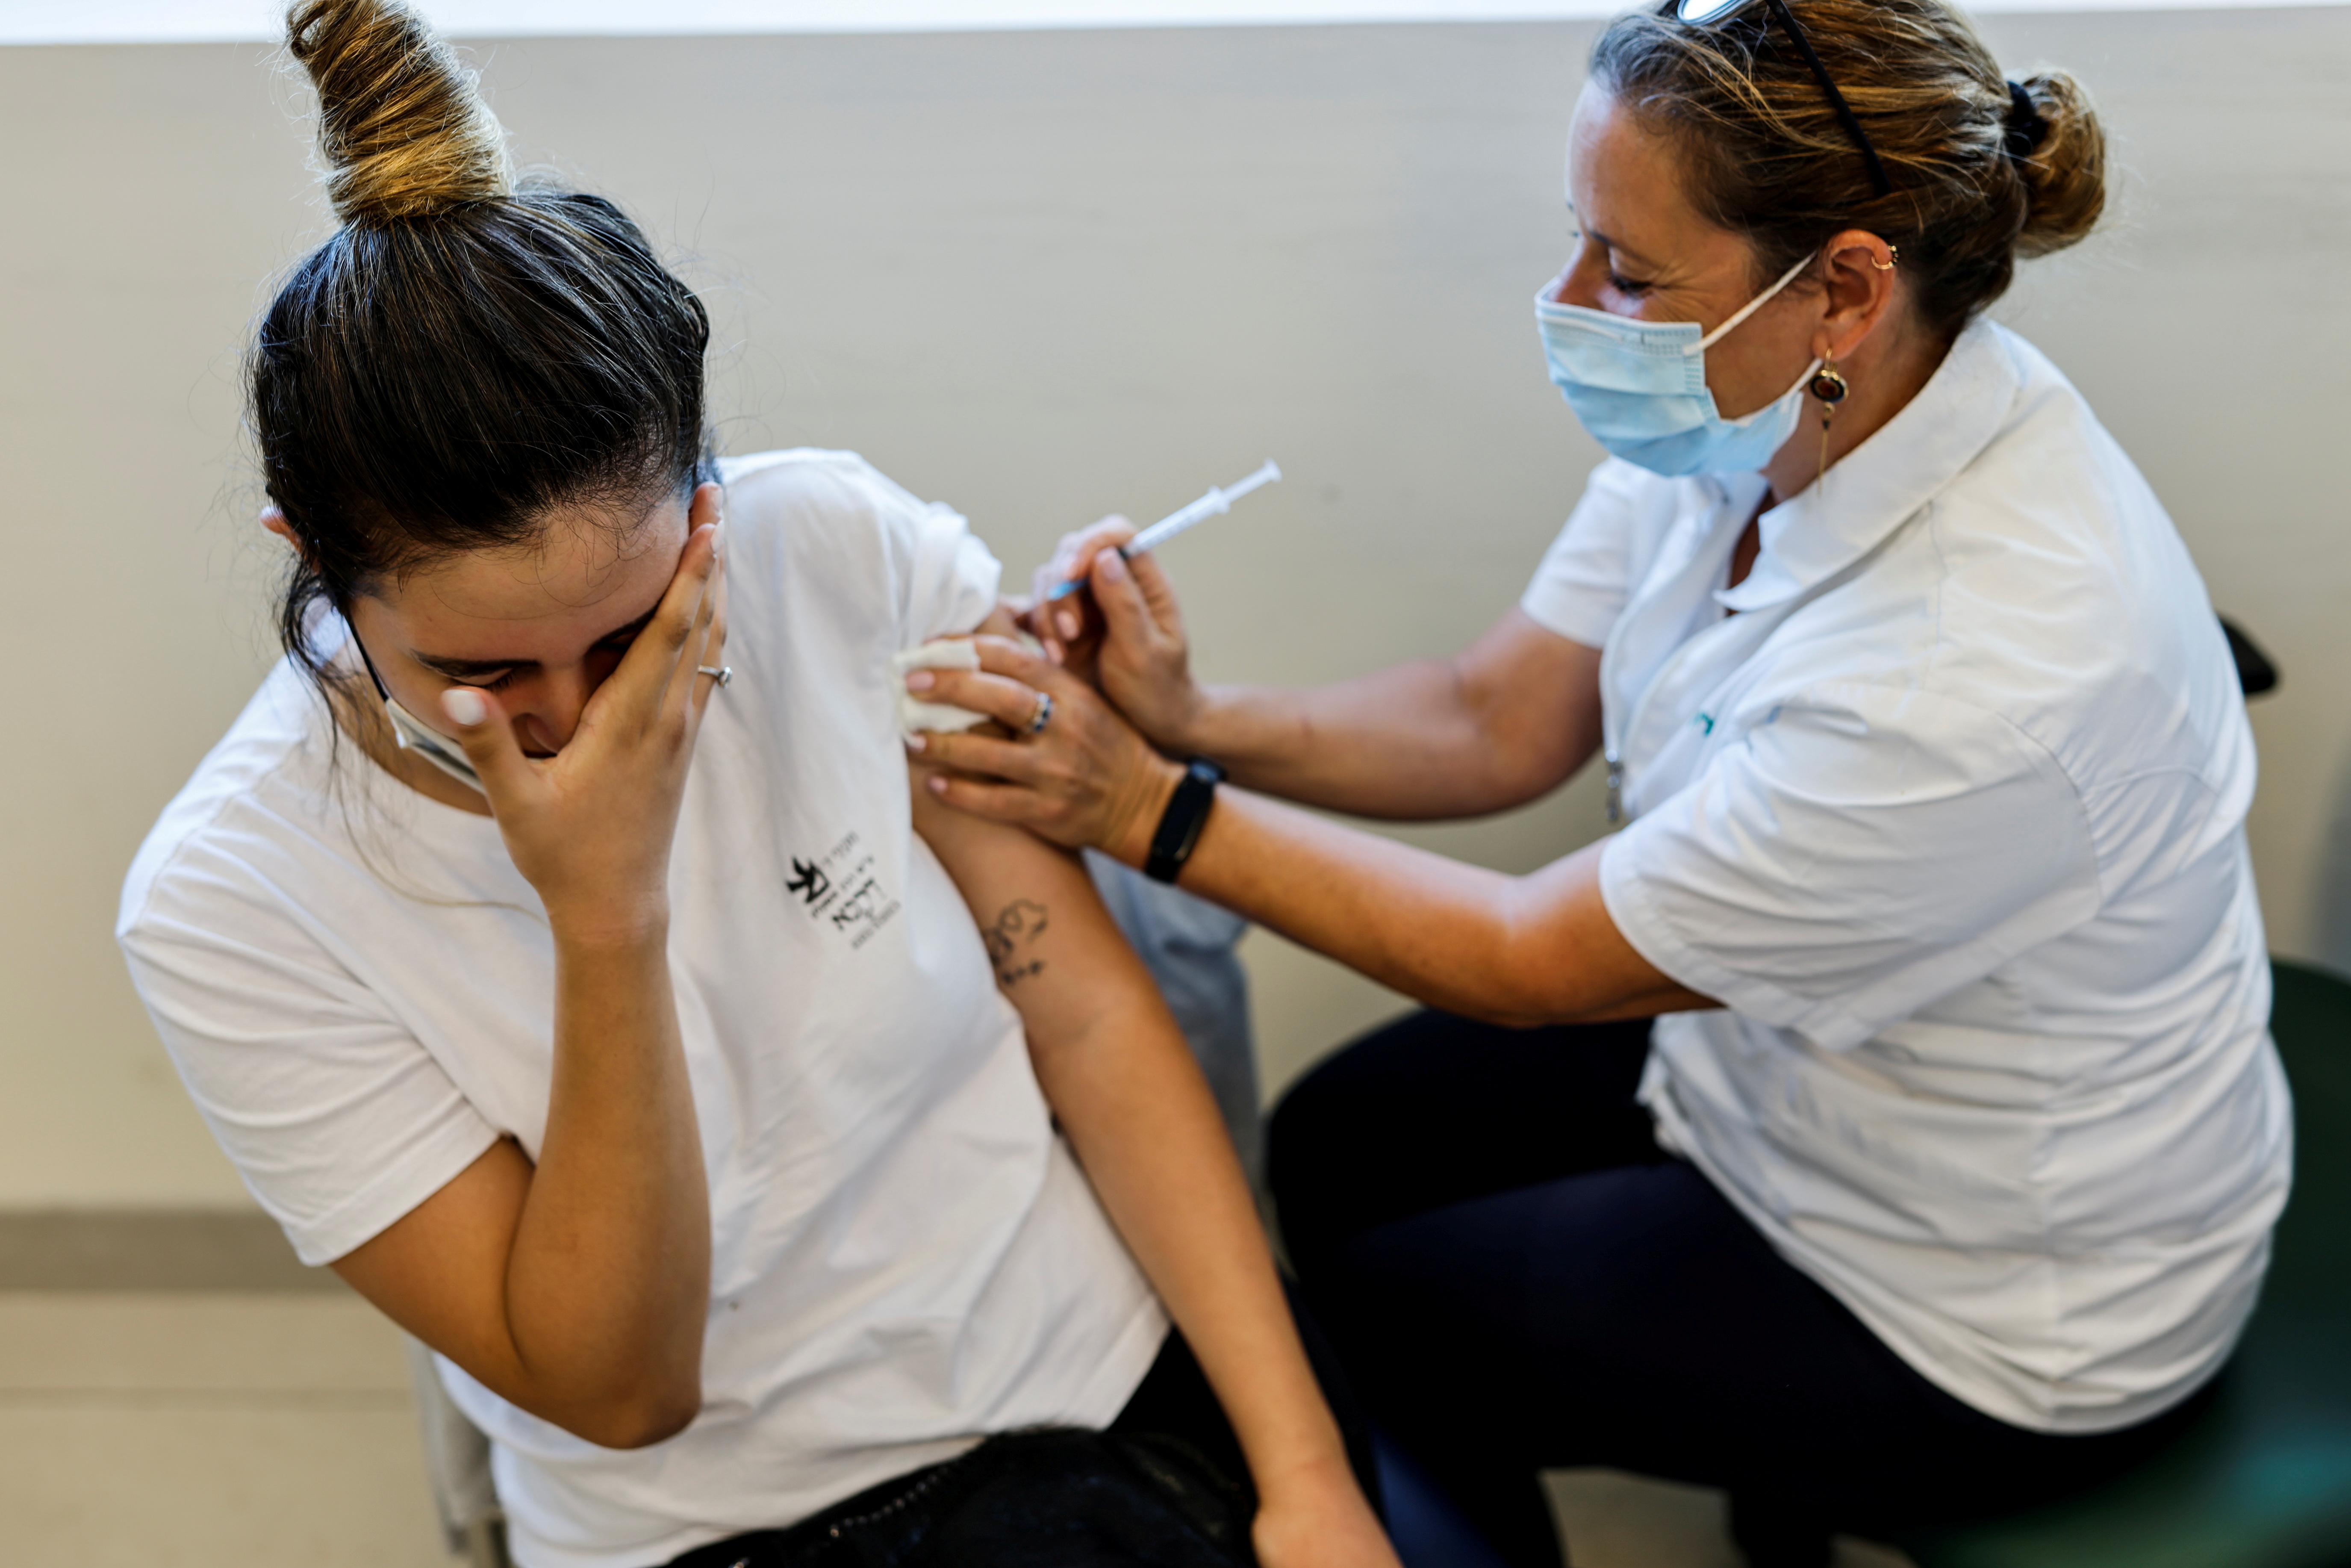 A teenager receives a dose of a vaccine against the coronavirus disease (COVID-19) after Israel approved the usage of the vaccine for youngsters aged 12-15, at a Clalit healthcare maintenance organisation in Ashkelon